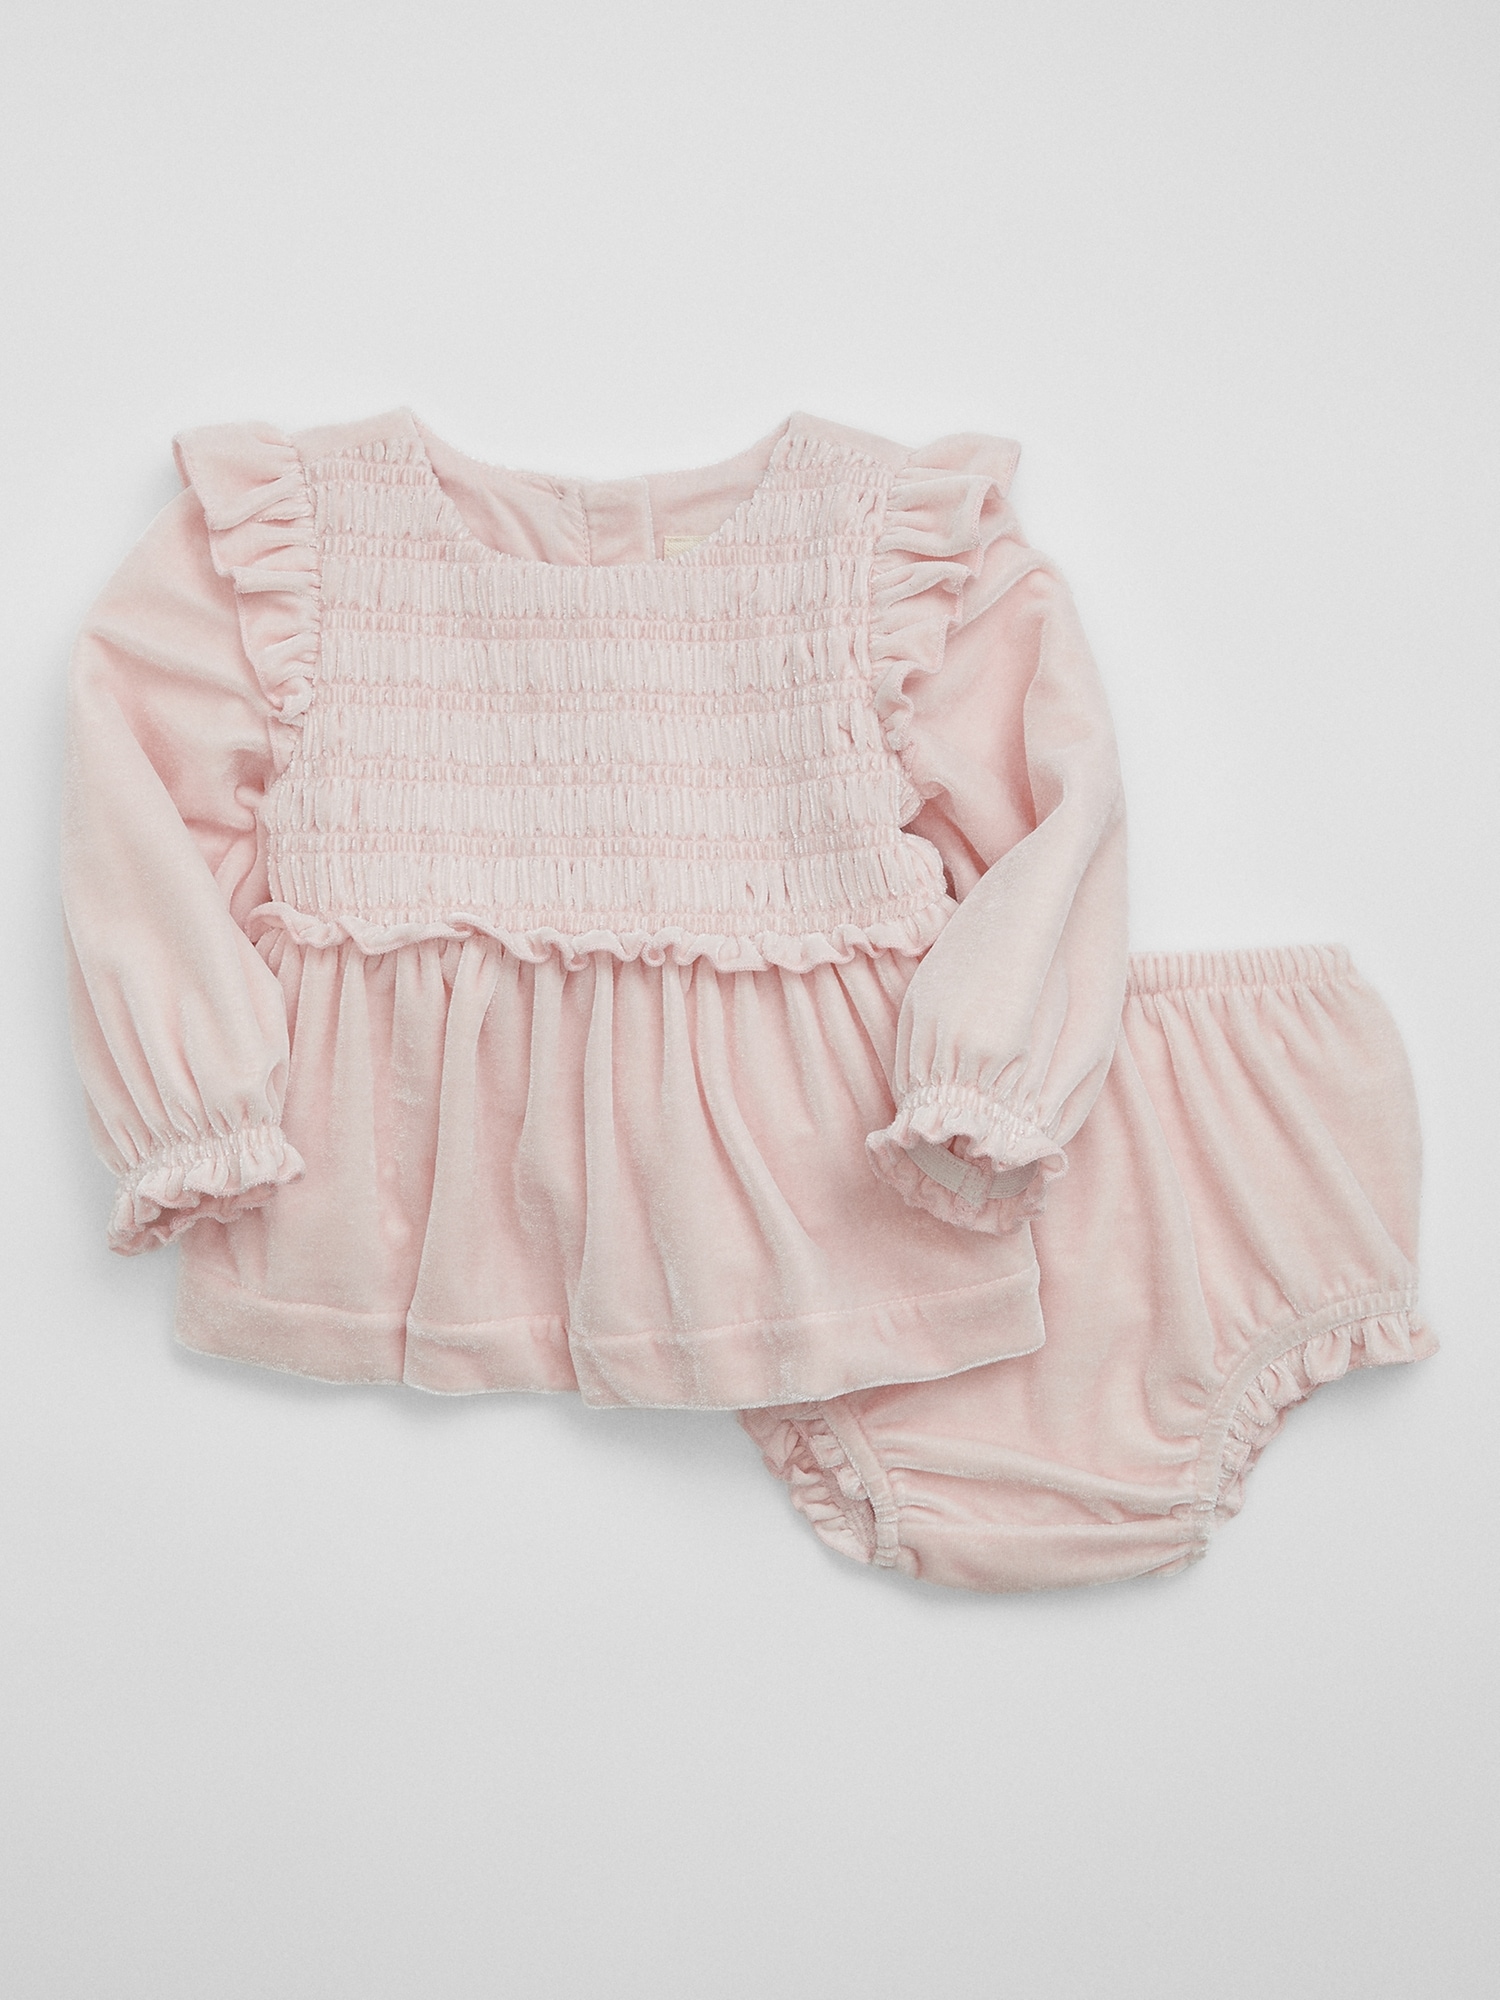 Baby Velvet Smocked Two-Piece Outfit Set | Gap Factory